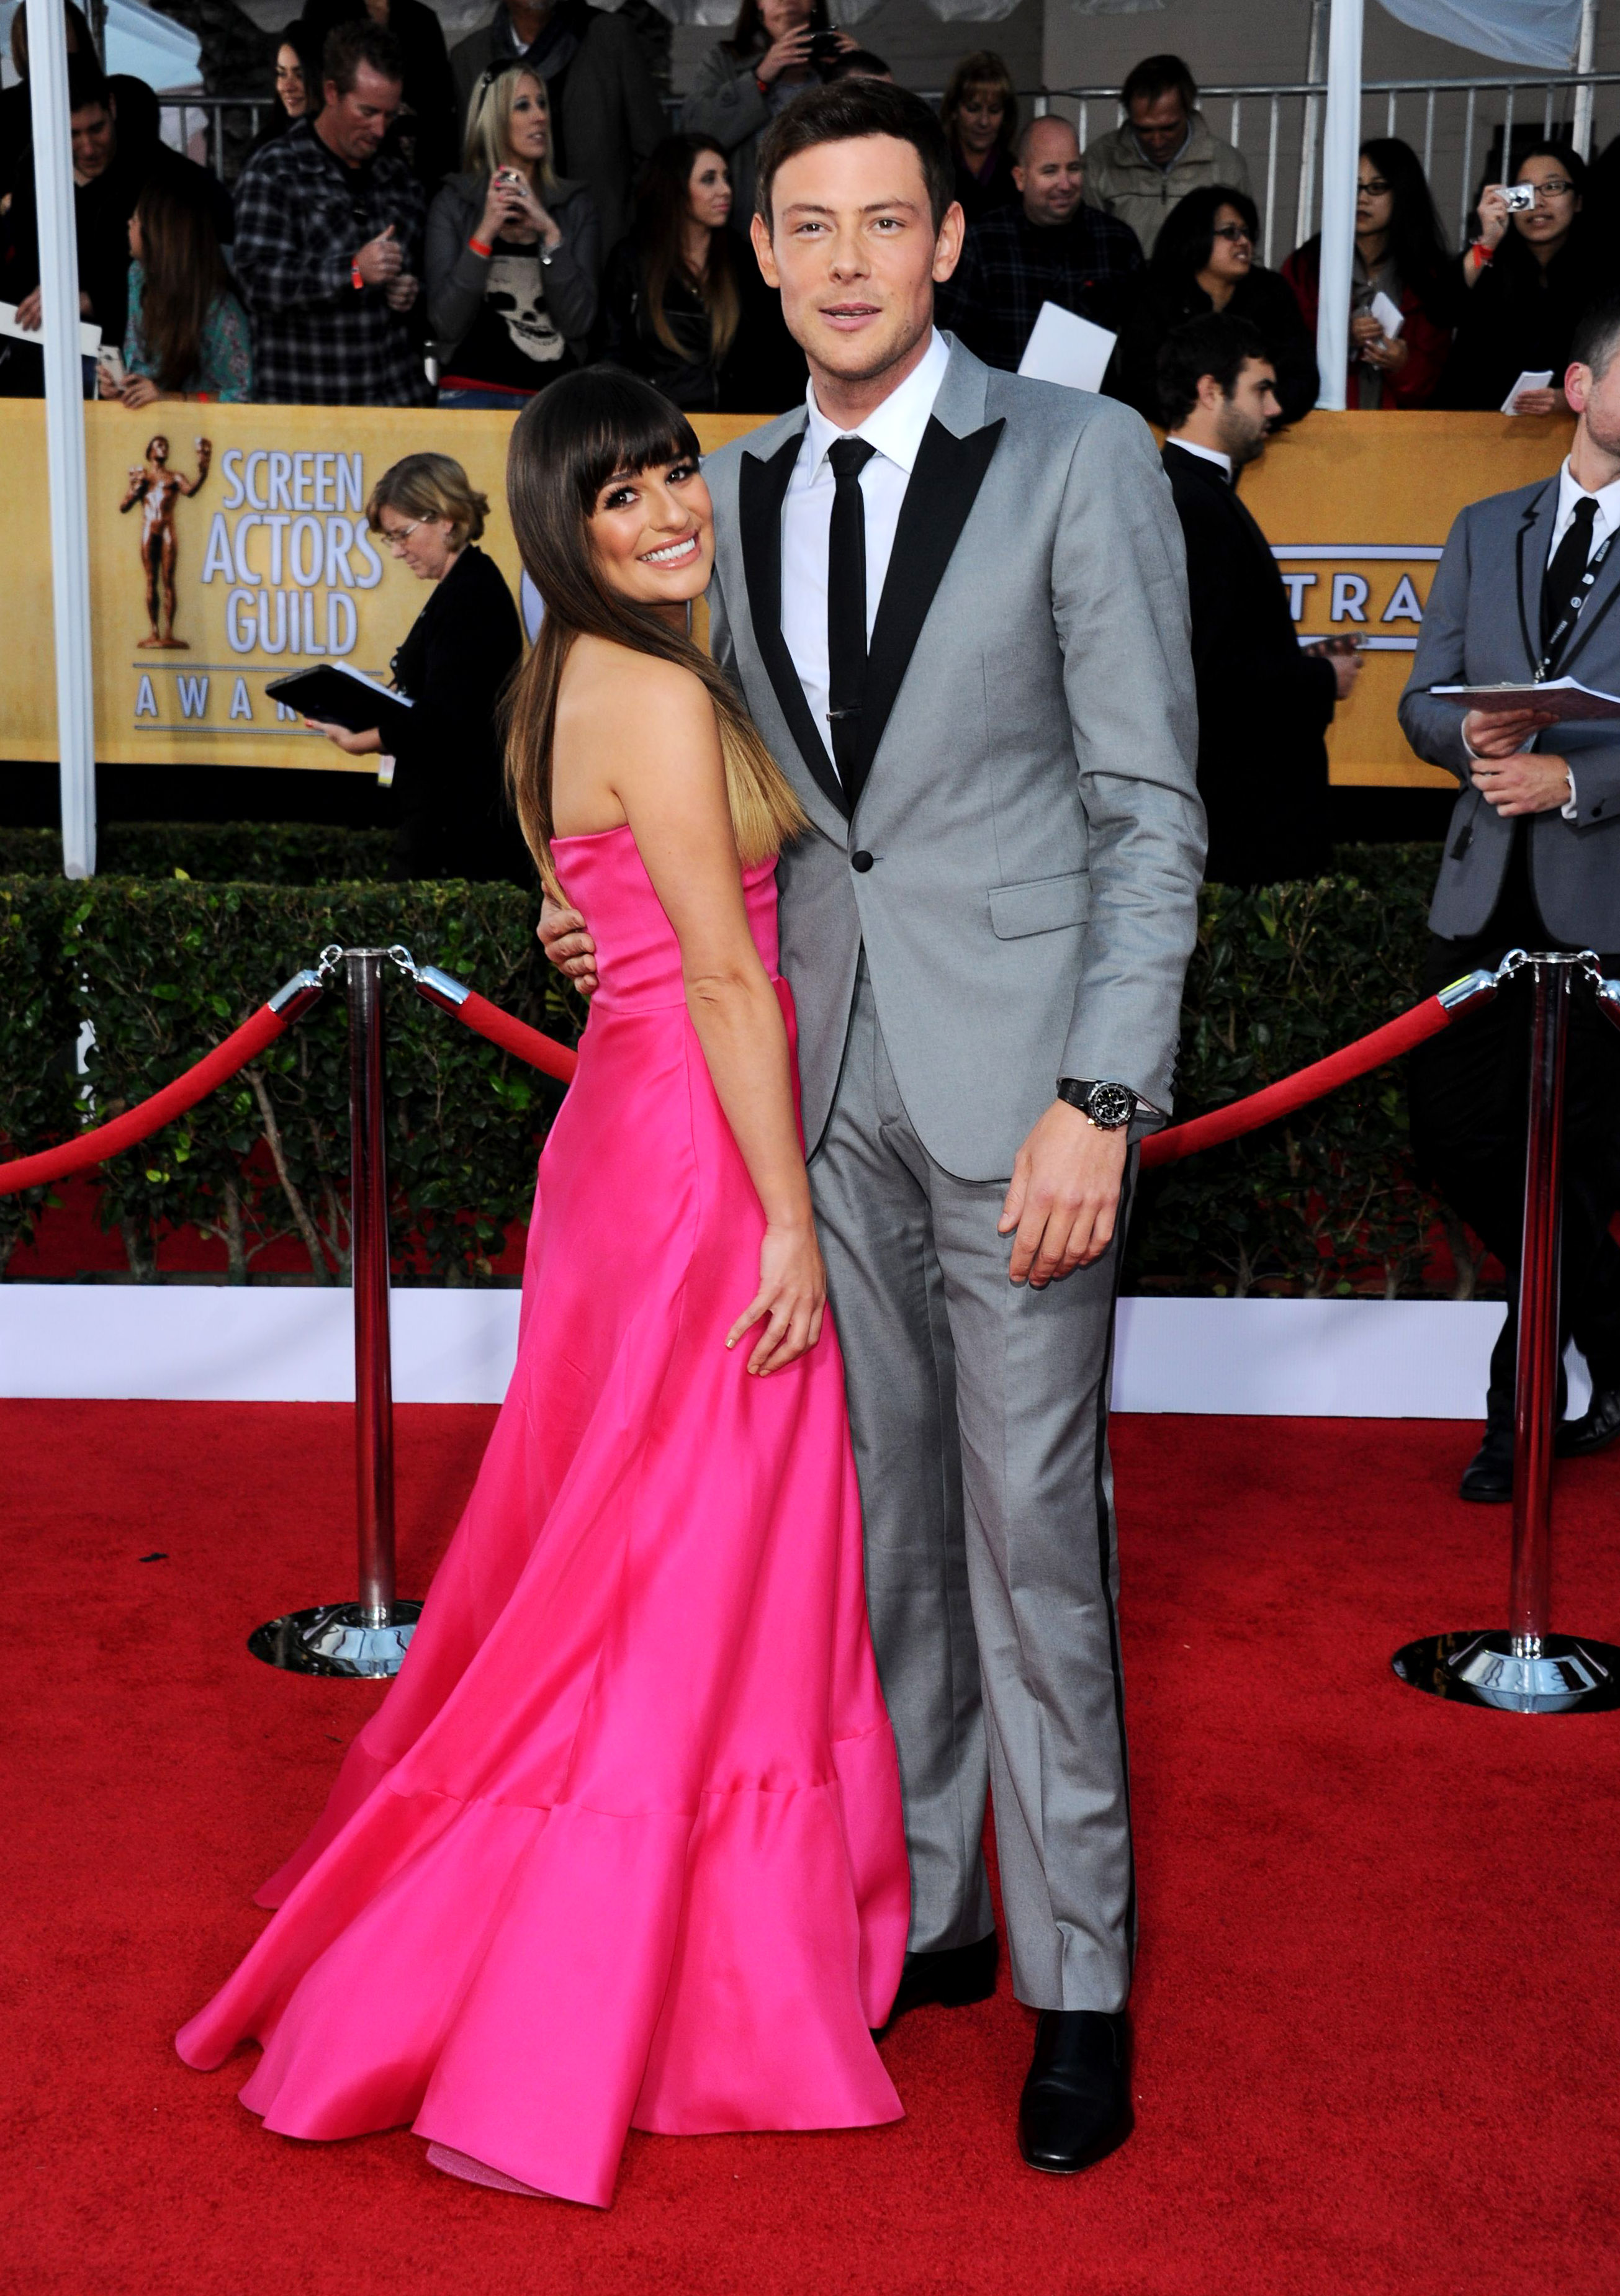 Lea Michele, Cory Monteith's Relationship Started on 'Glee'